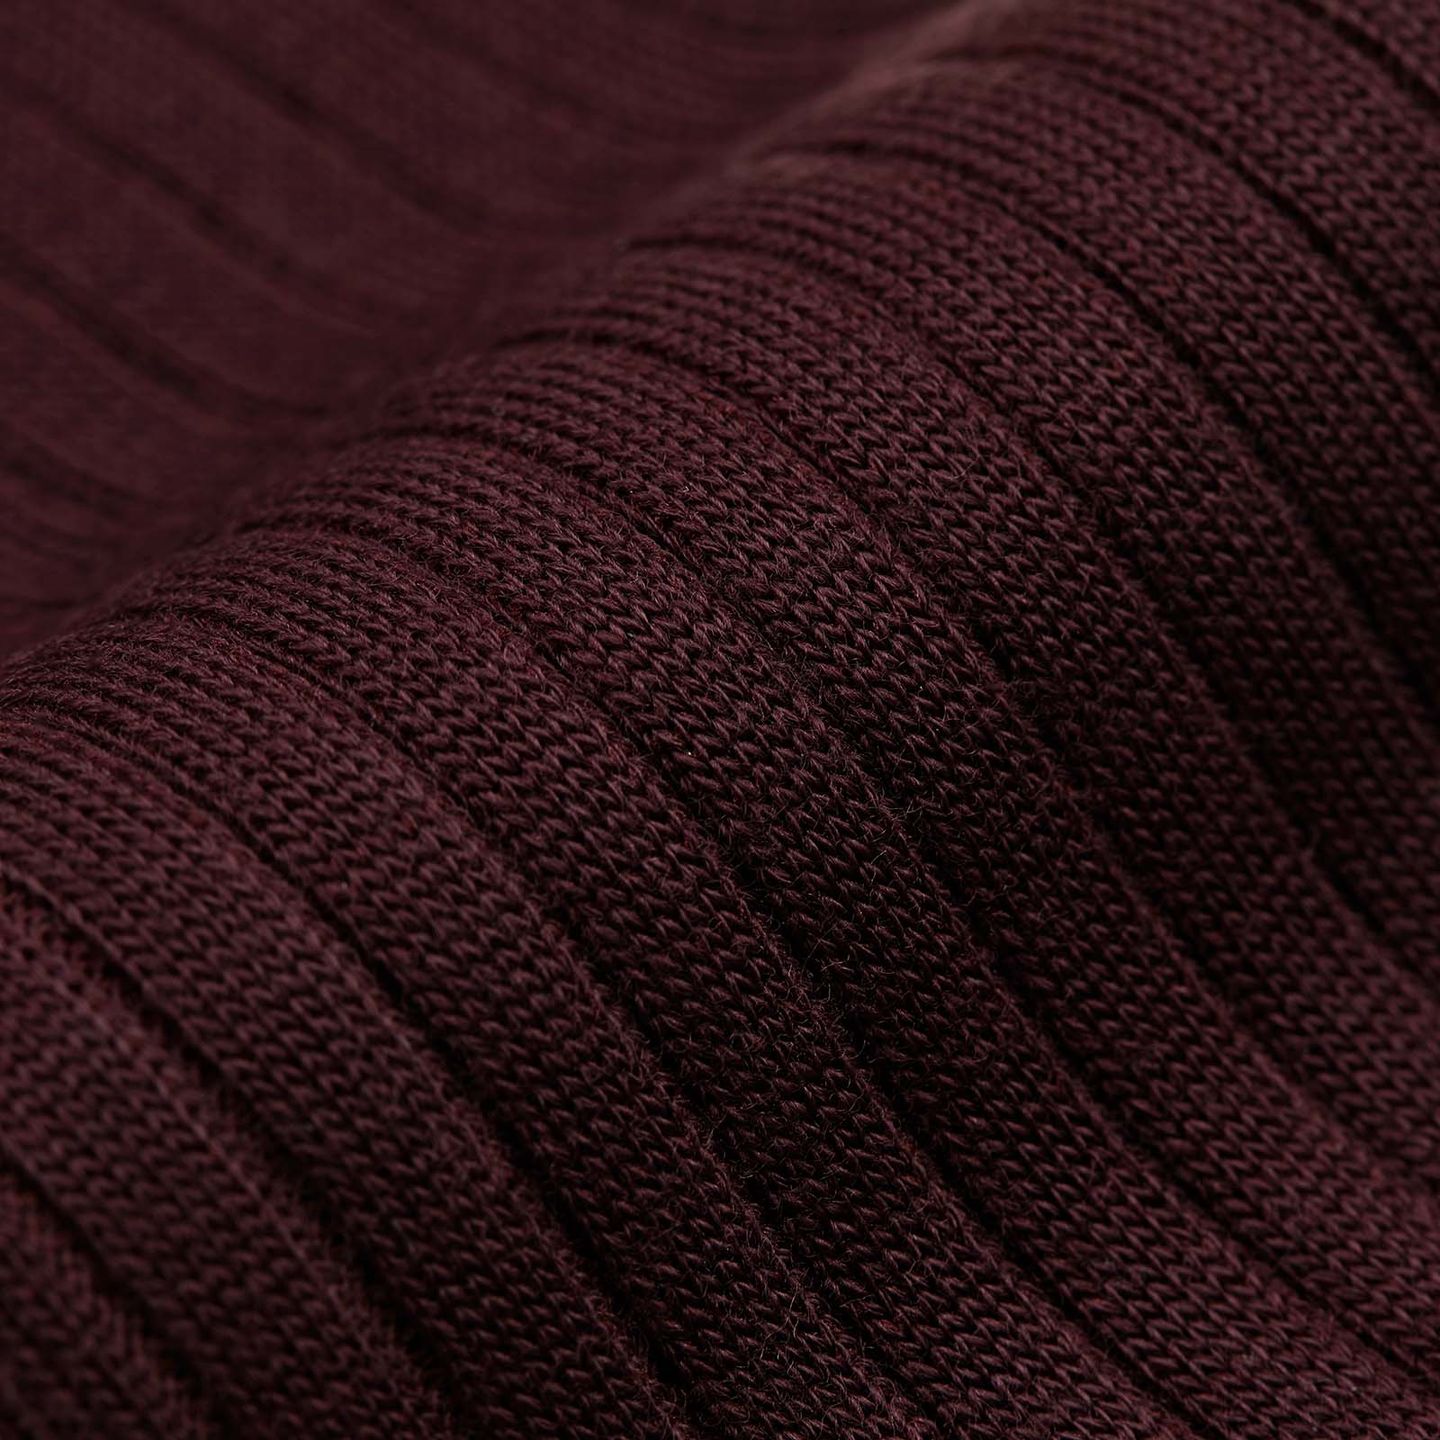 Close up of a brown sock